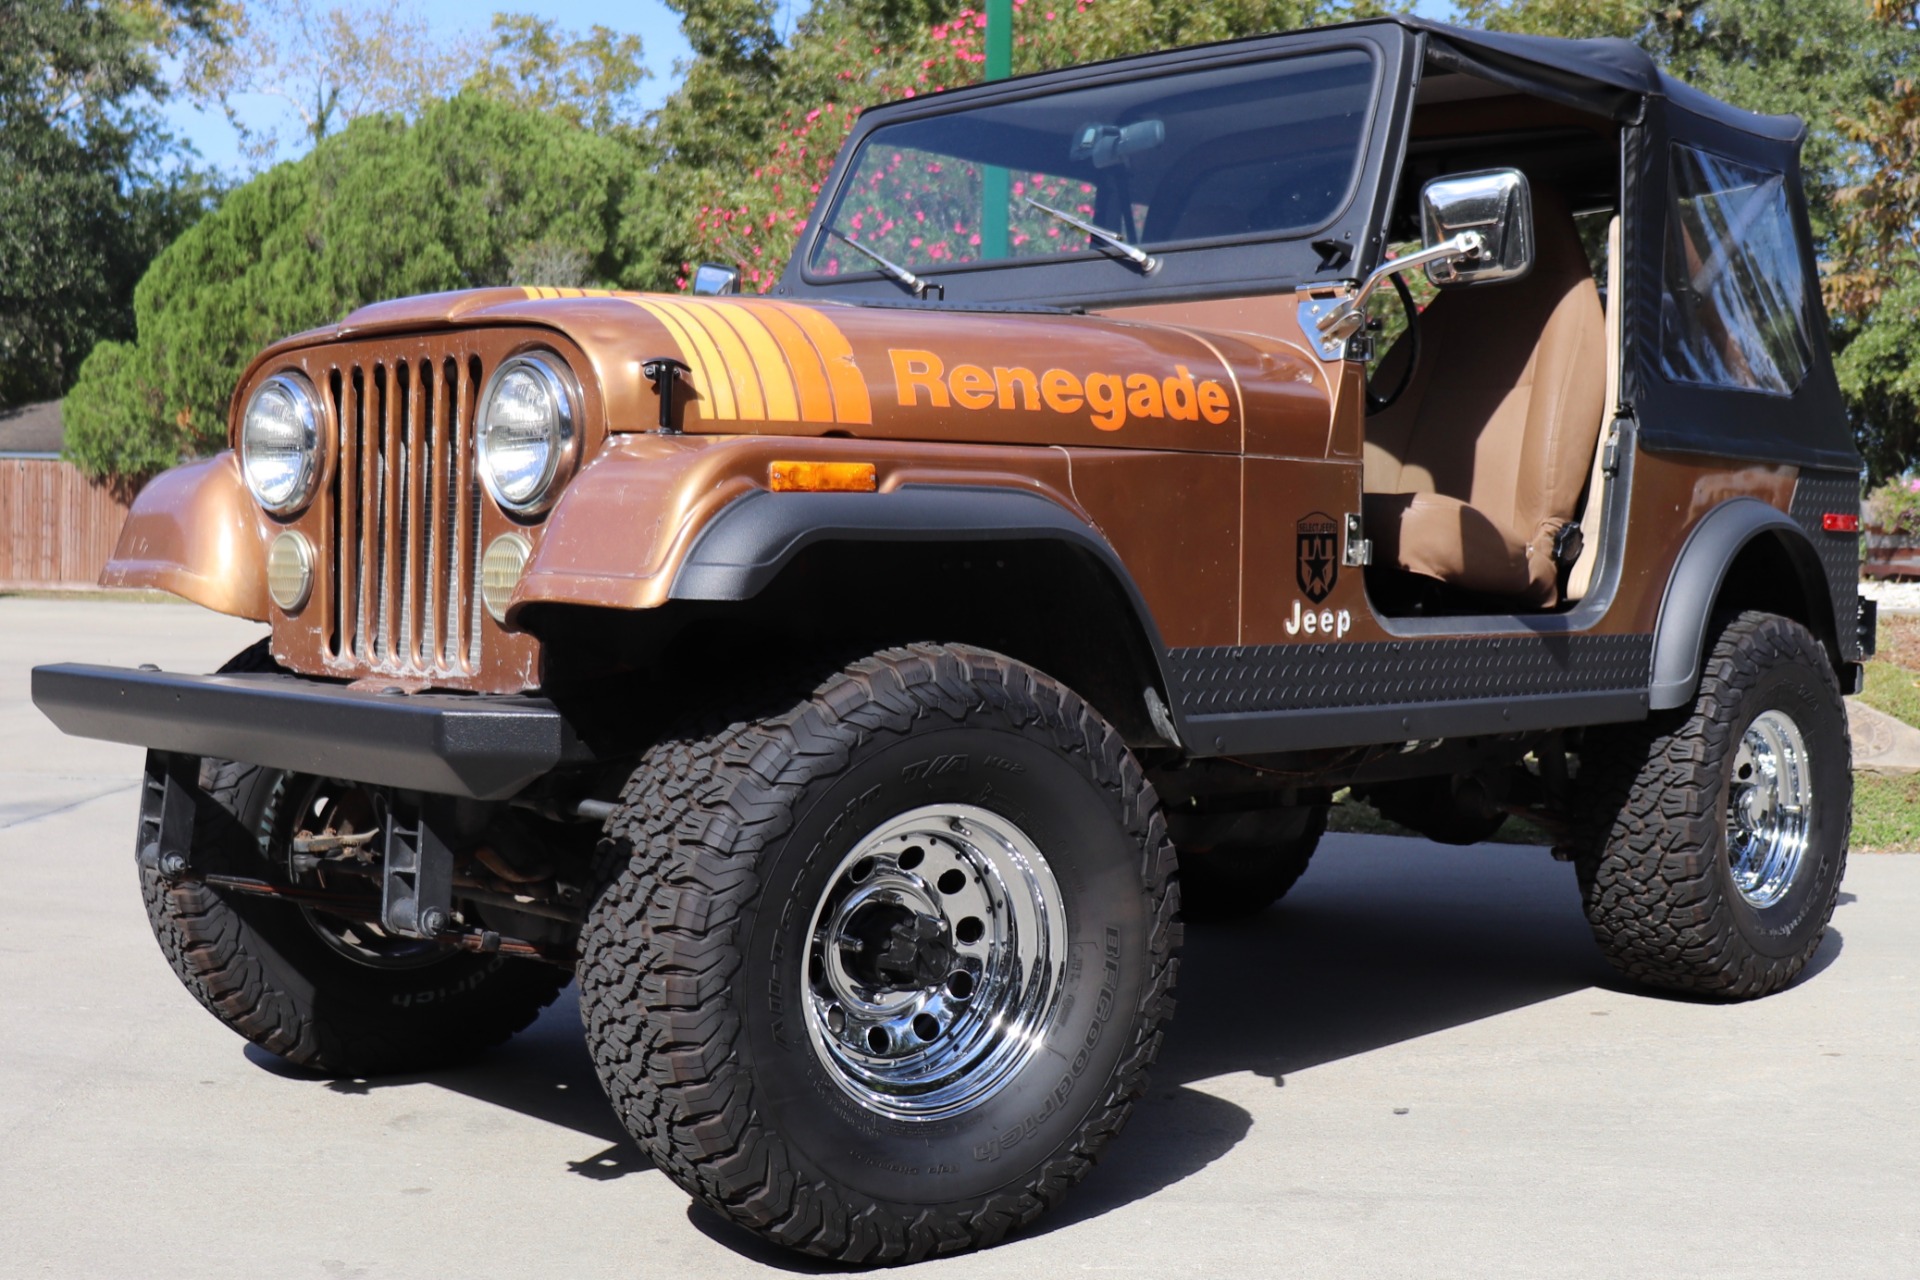 Used 1980 Jeep CJ-7 Renegade For Sale ($18,995) | Select Jeeps Inc. Stock  #719397